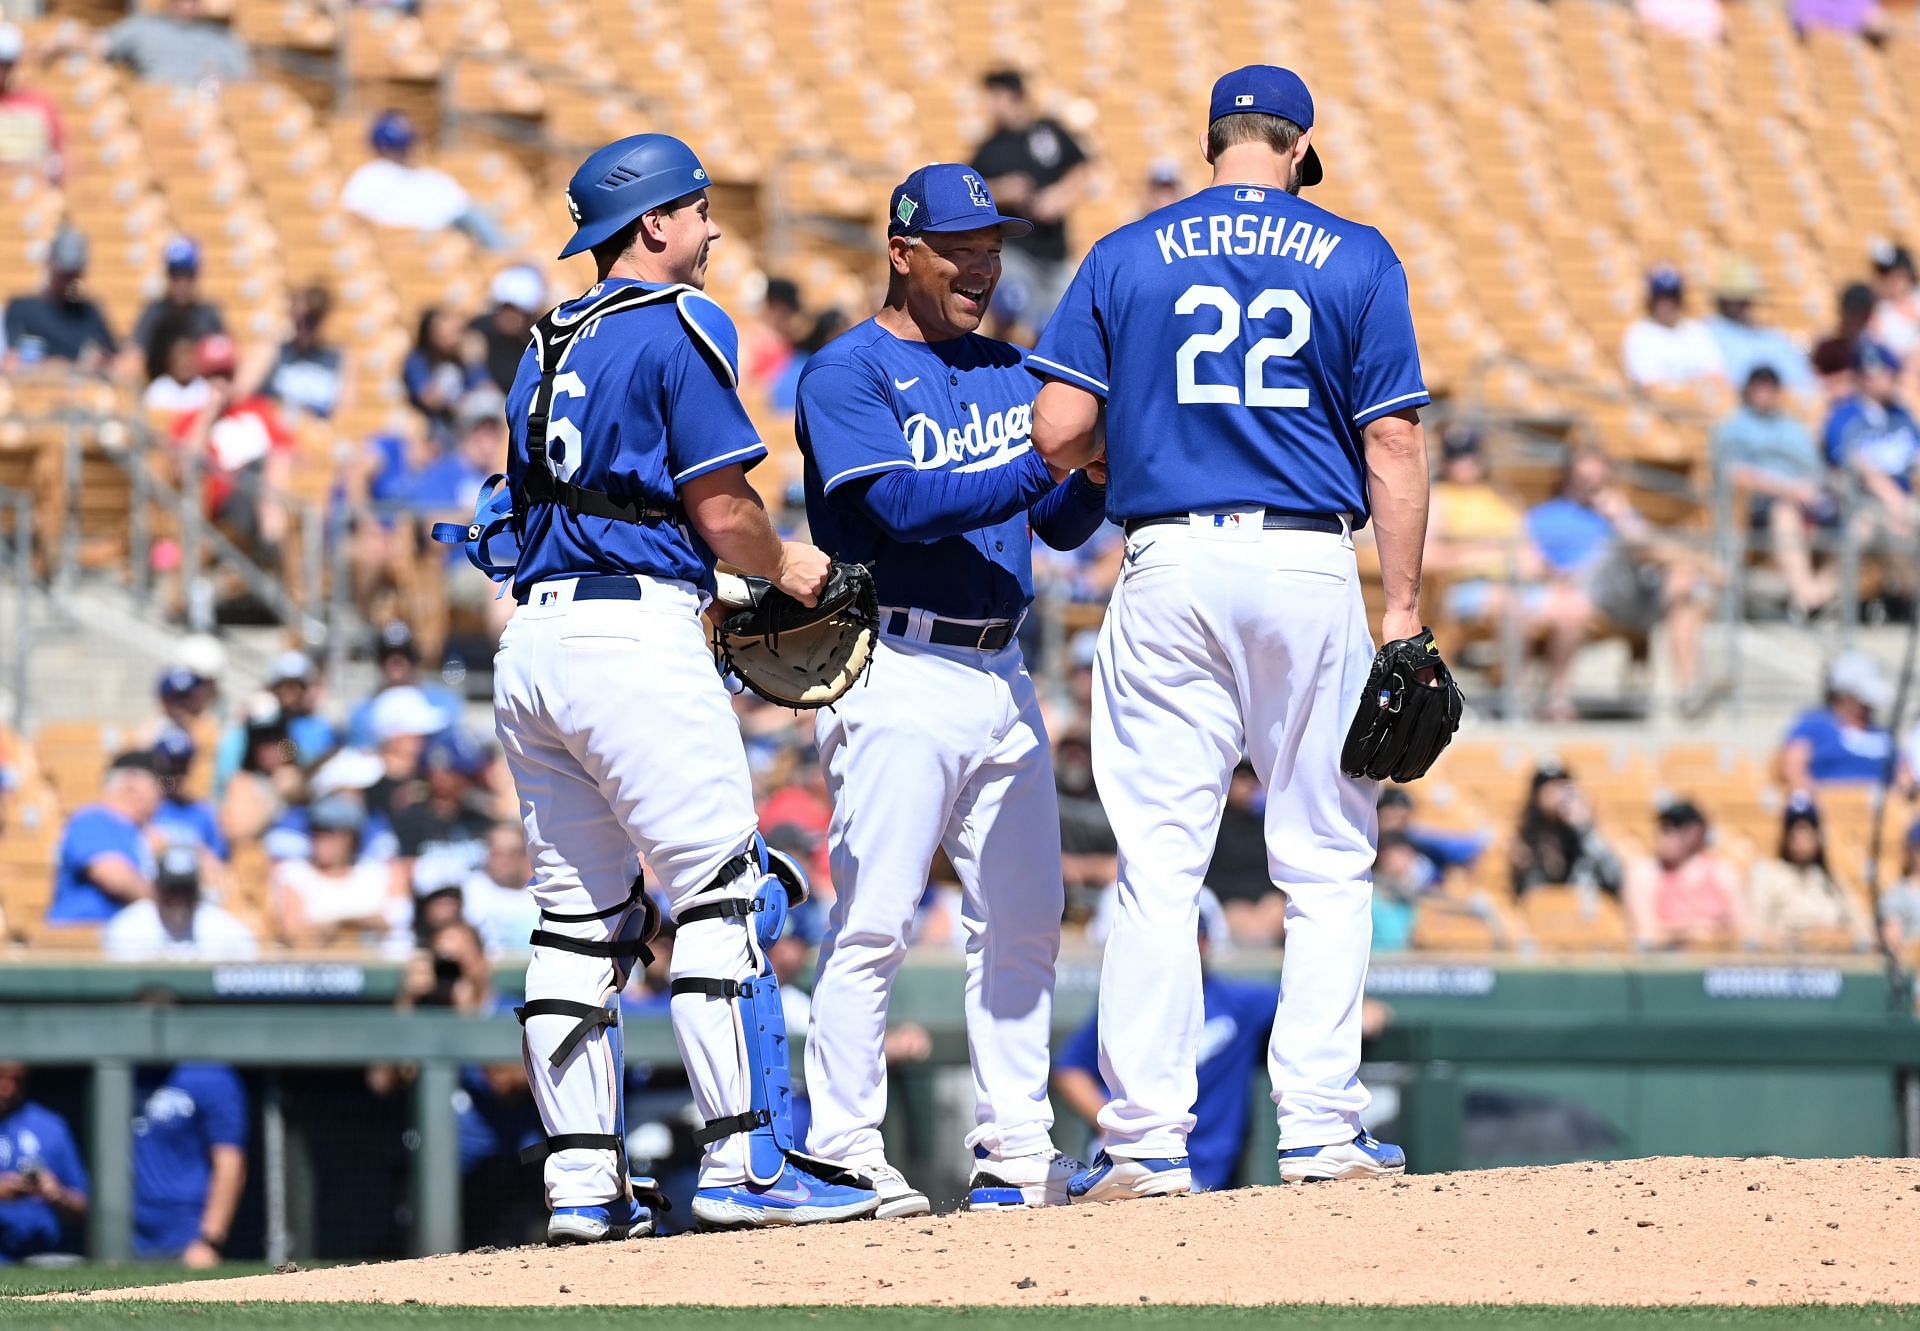 Los Angeles Dodgers manager Dave Roberts guarantees team will win